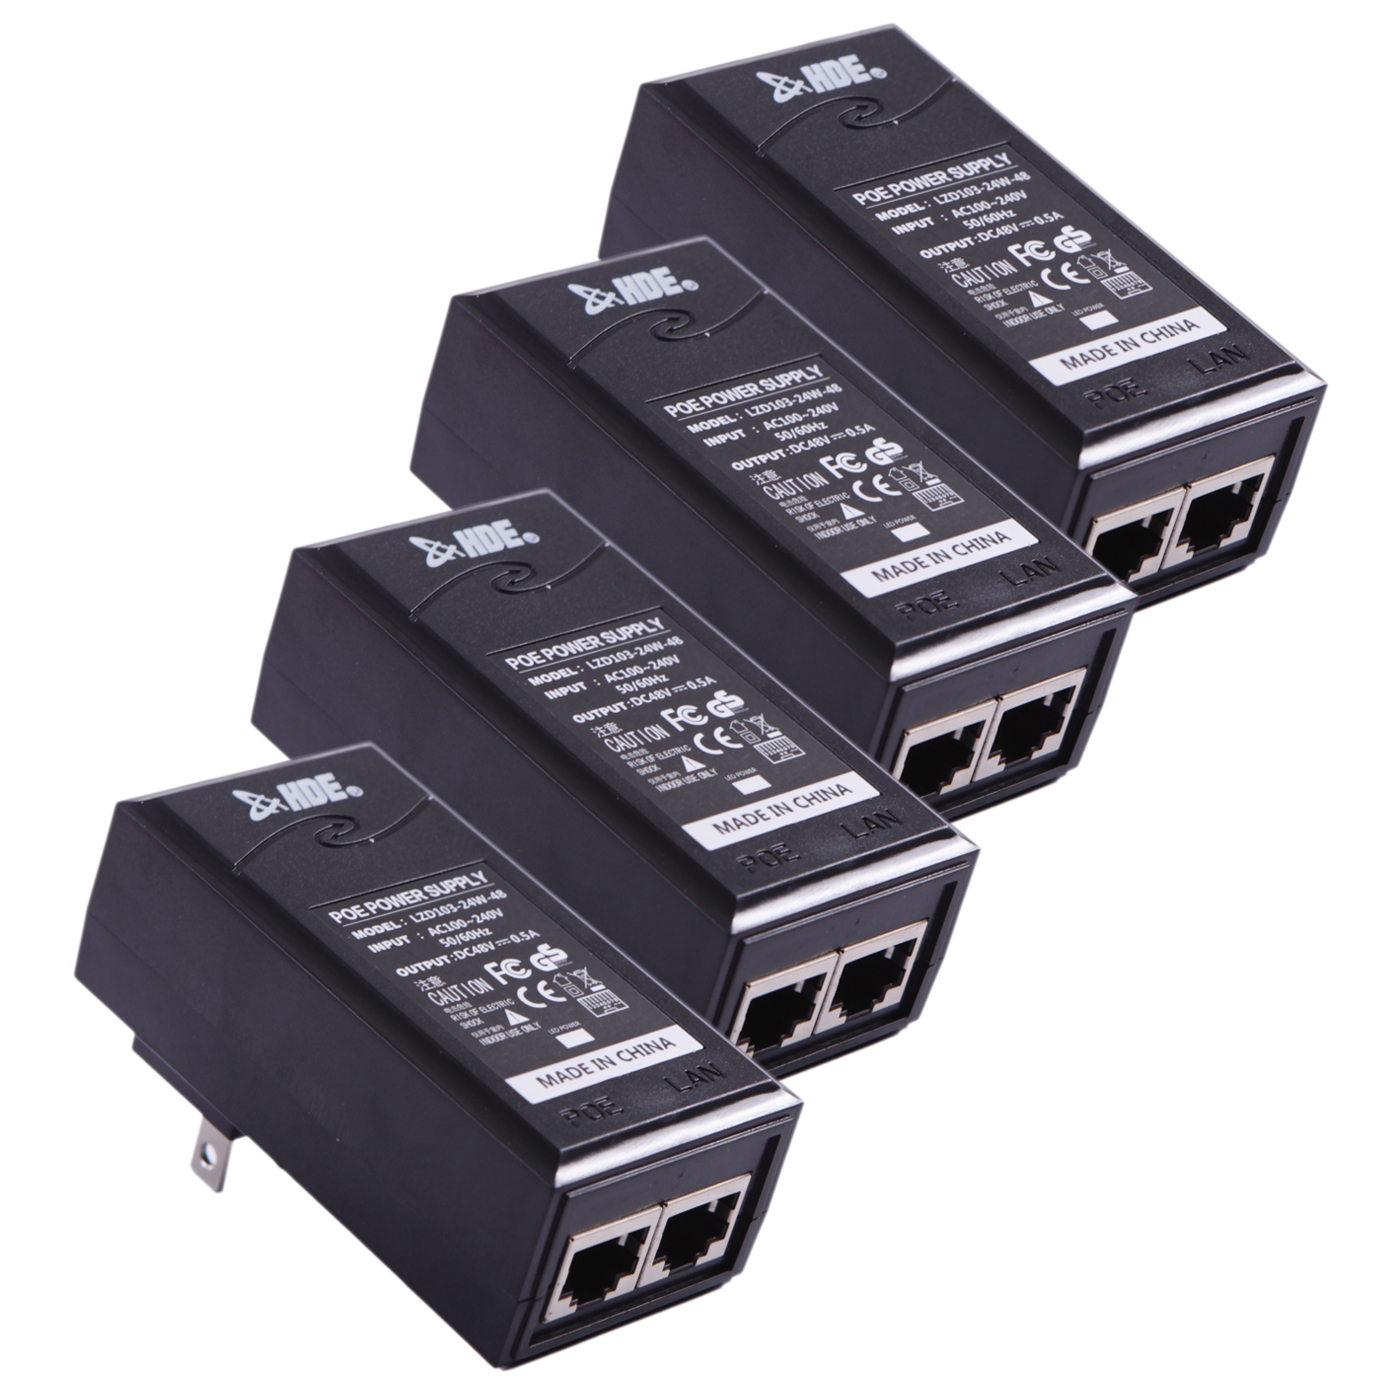 Passive PoE Injector Switch 48V-0.5A for Cisco UK